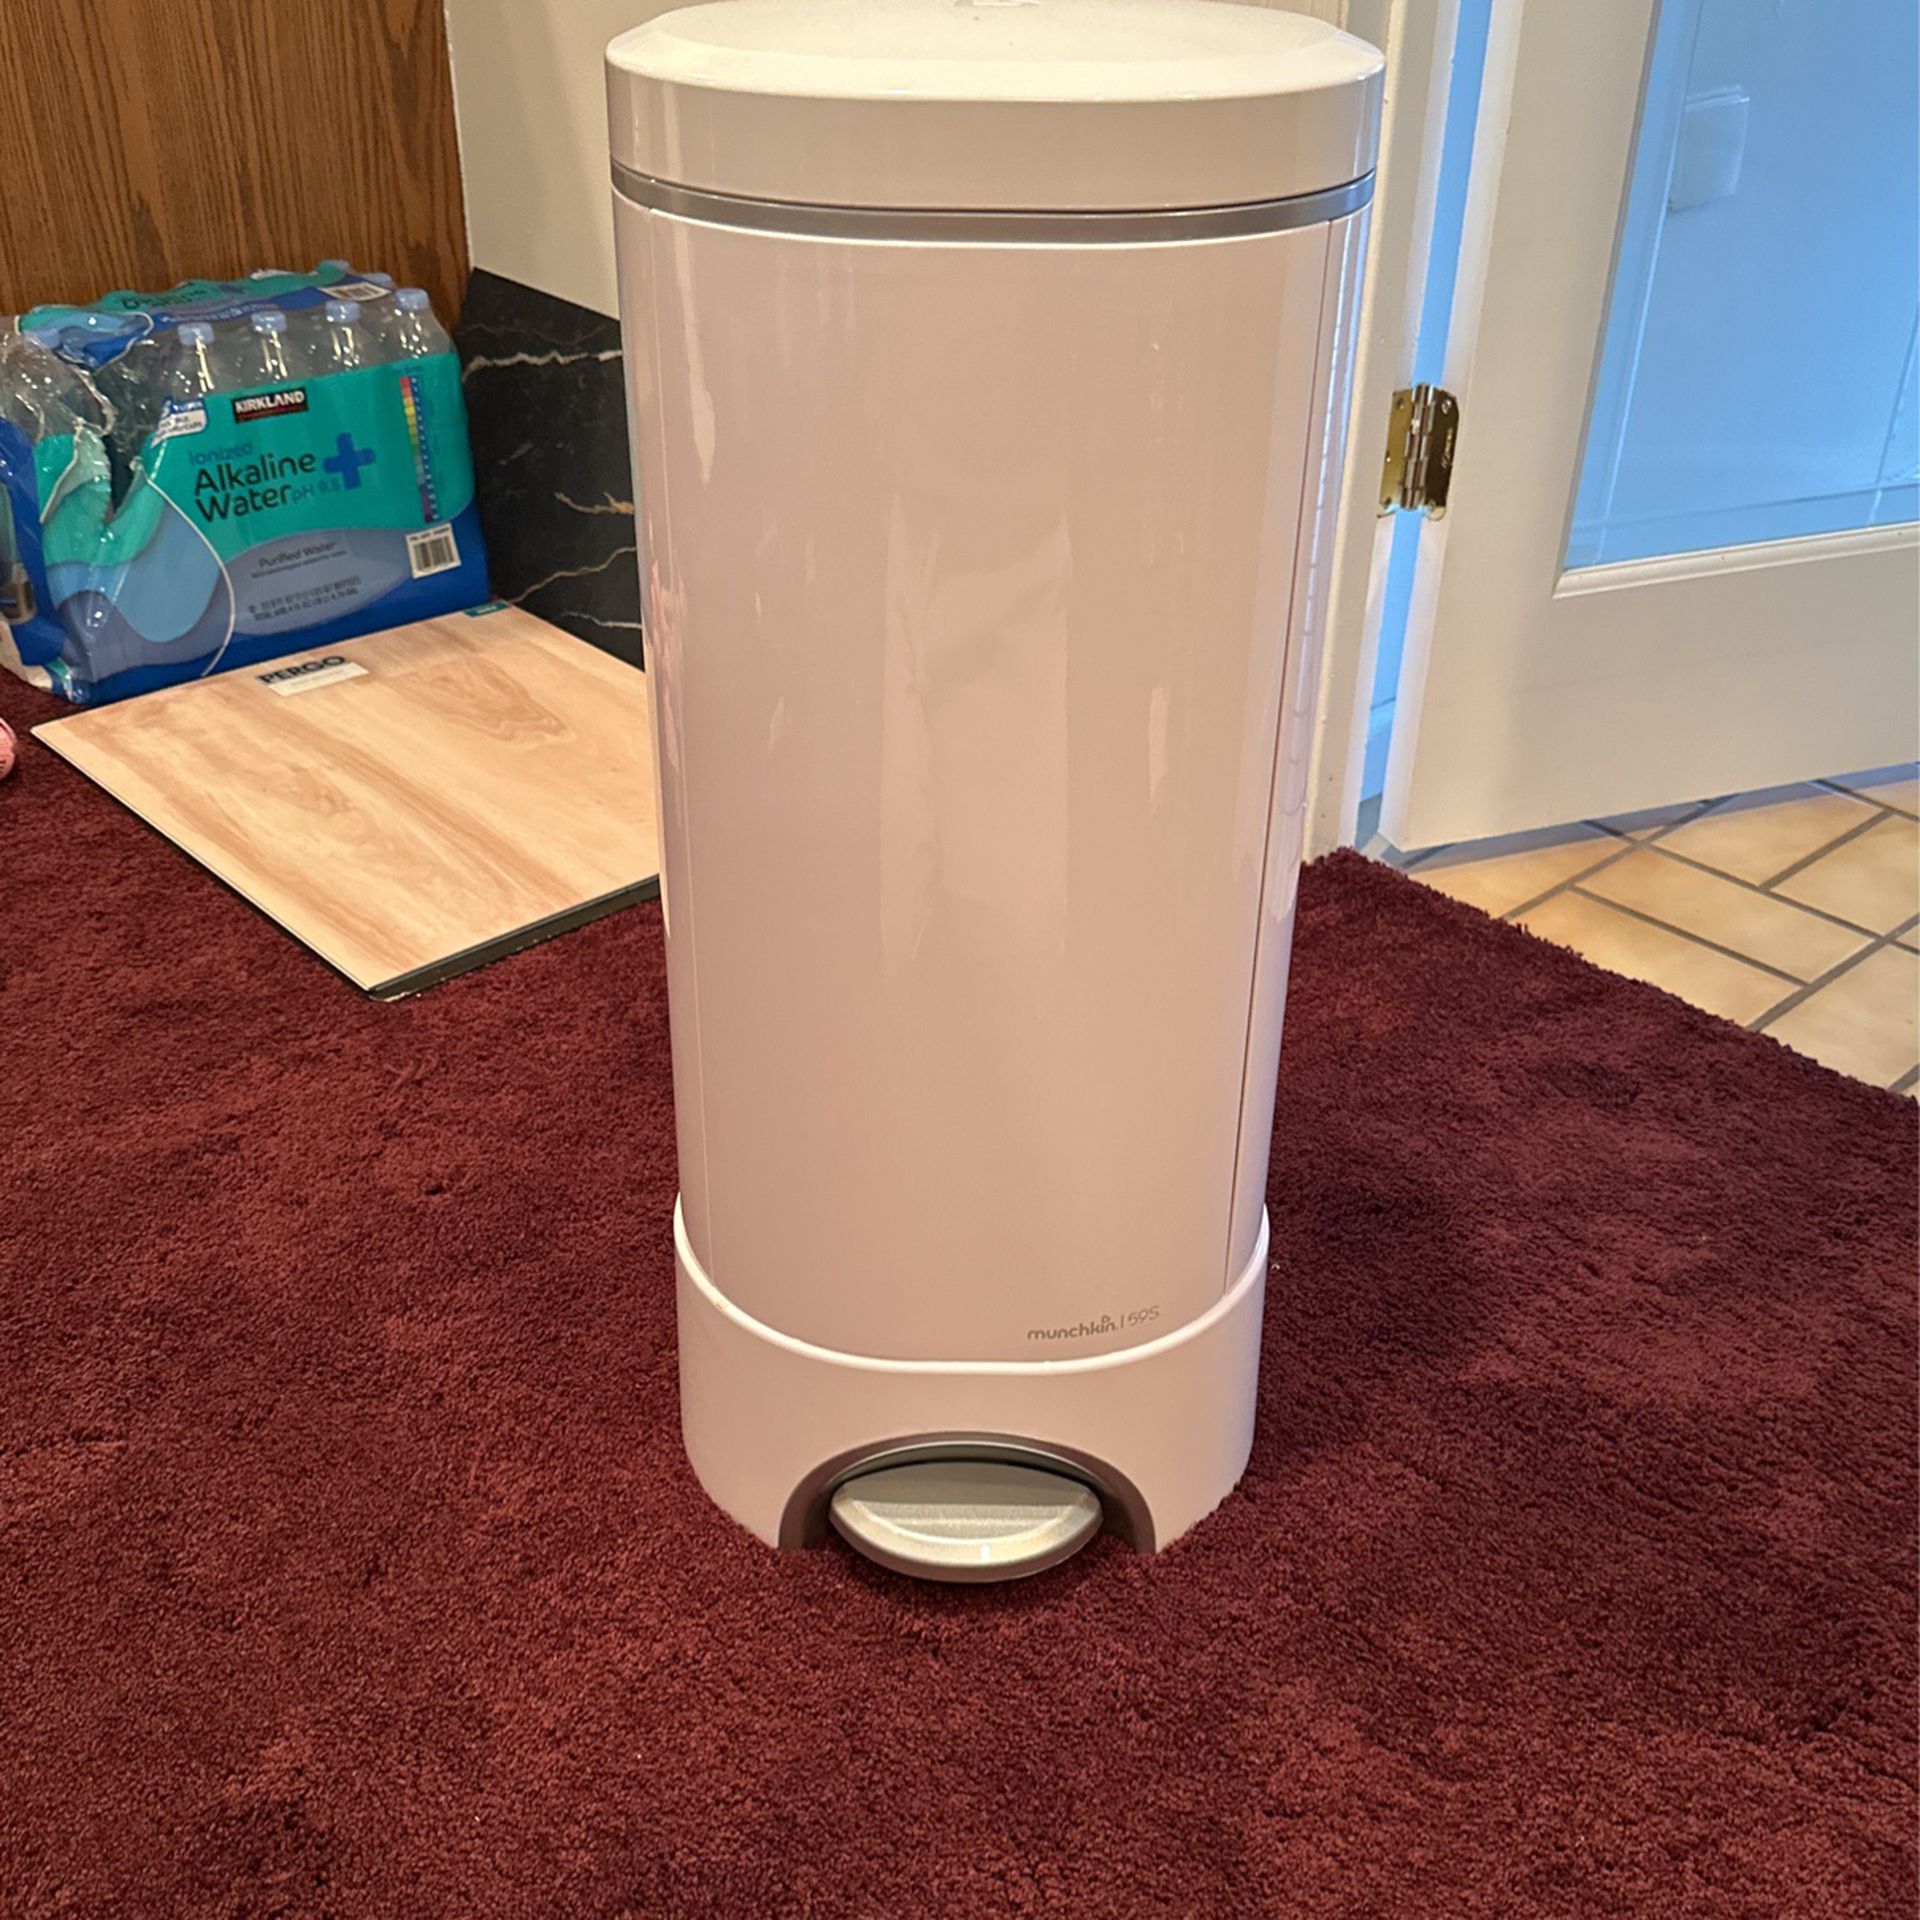 Munchkin Diaper Pail, With The Uv Light, Sanitation, Never Used.